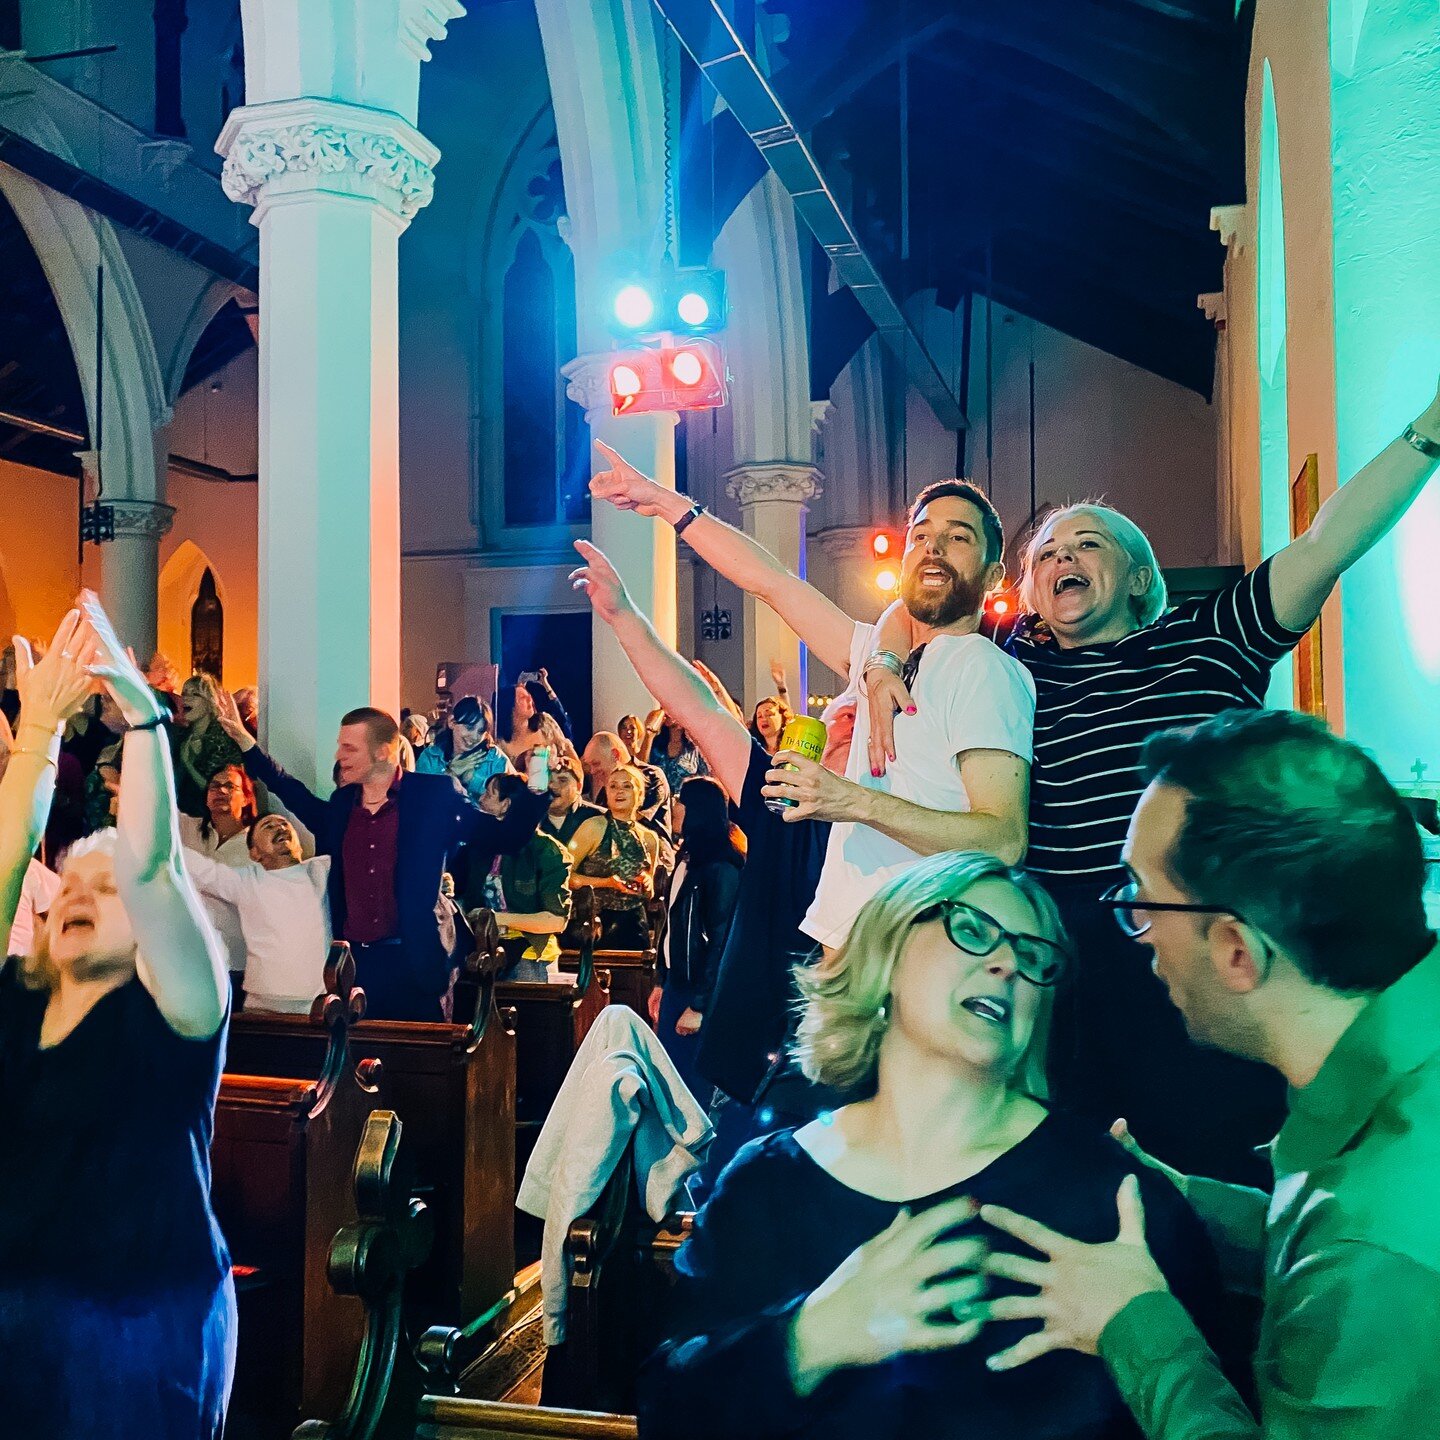 ...If only this flashback photo from June had sound. Then again, maybe not...! 

Fair to say everyone is in high spirits. As should you be, cos it's FRIDAY!

Grab the final few Sunday early bird tickets now and secure your spot at our amazing Organok